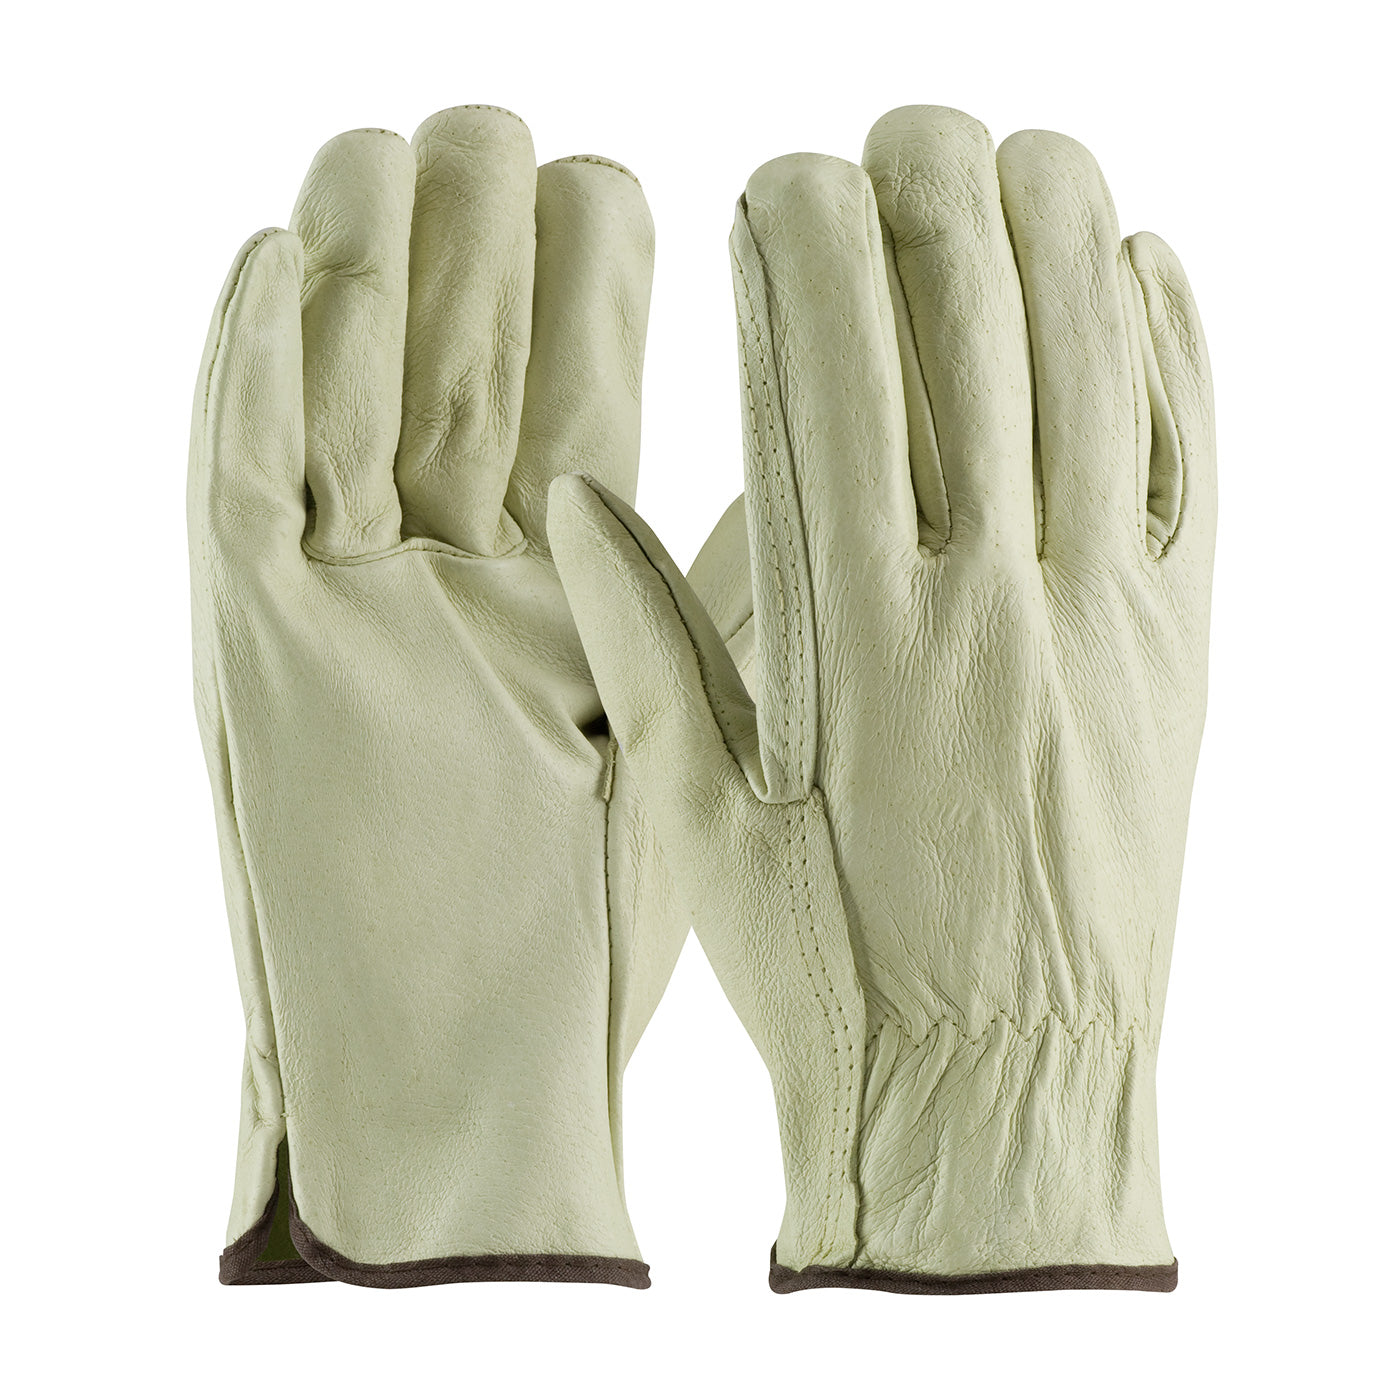 West Chester 994/M Regular Grade Top Grain Pigskin Leather Drivers Glove - Straight Thumb